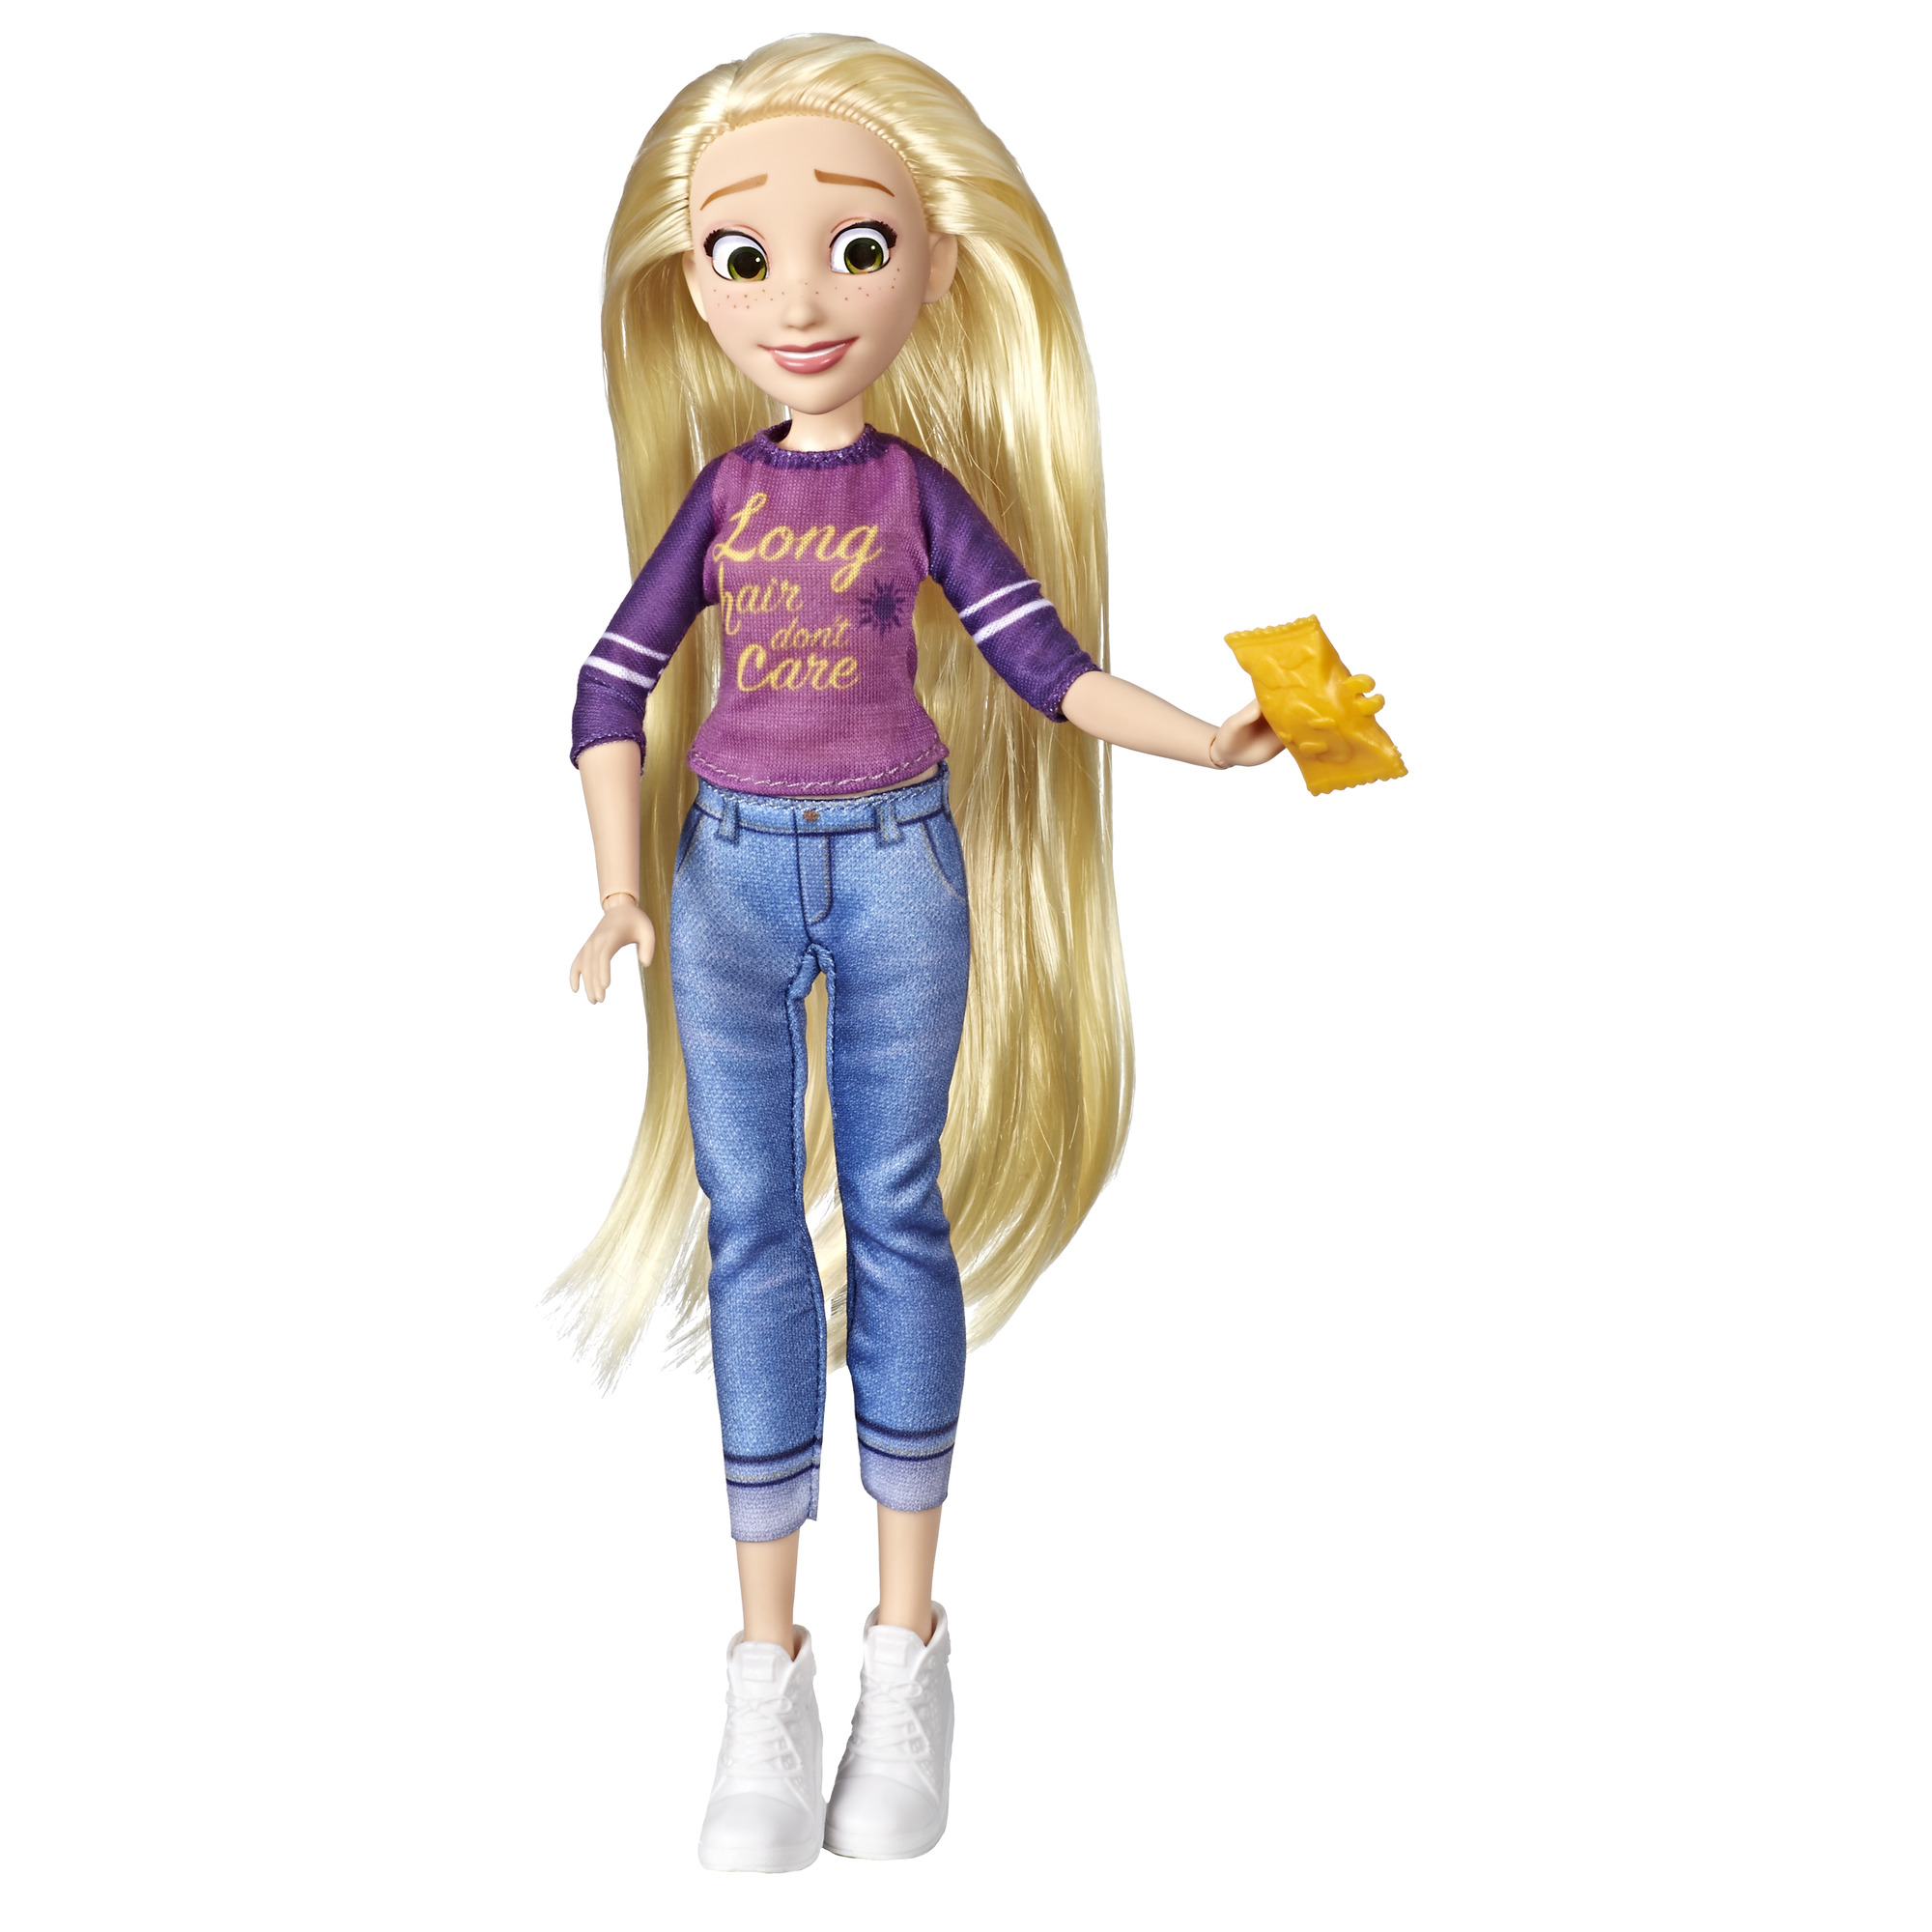 Disney Princess Comfy Squad Rapunzel, Inspired by Ralph Breaks the Internet Movie - image 1 of 7